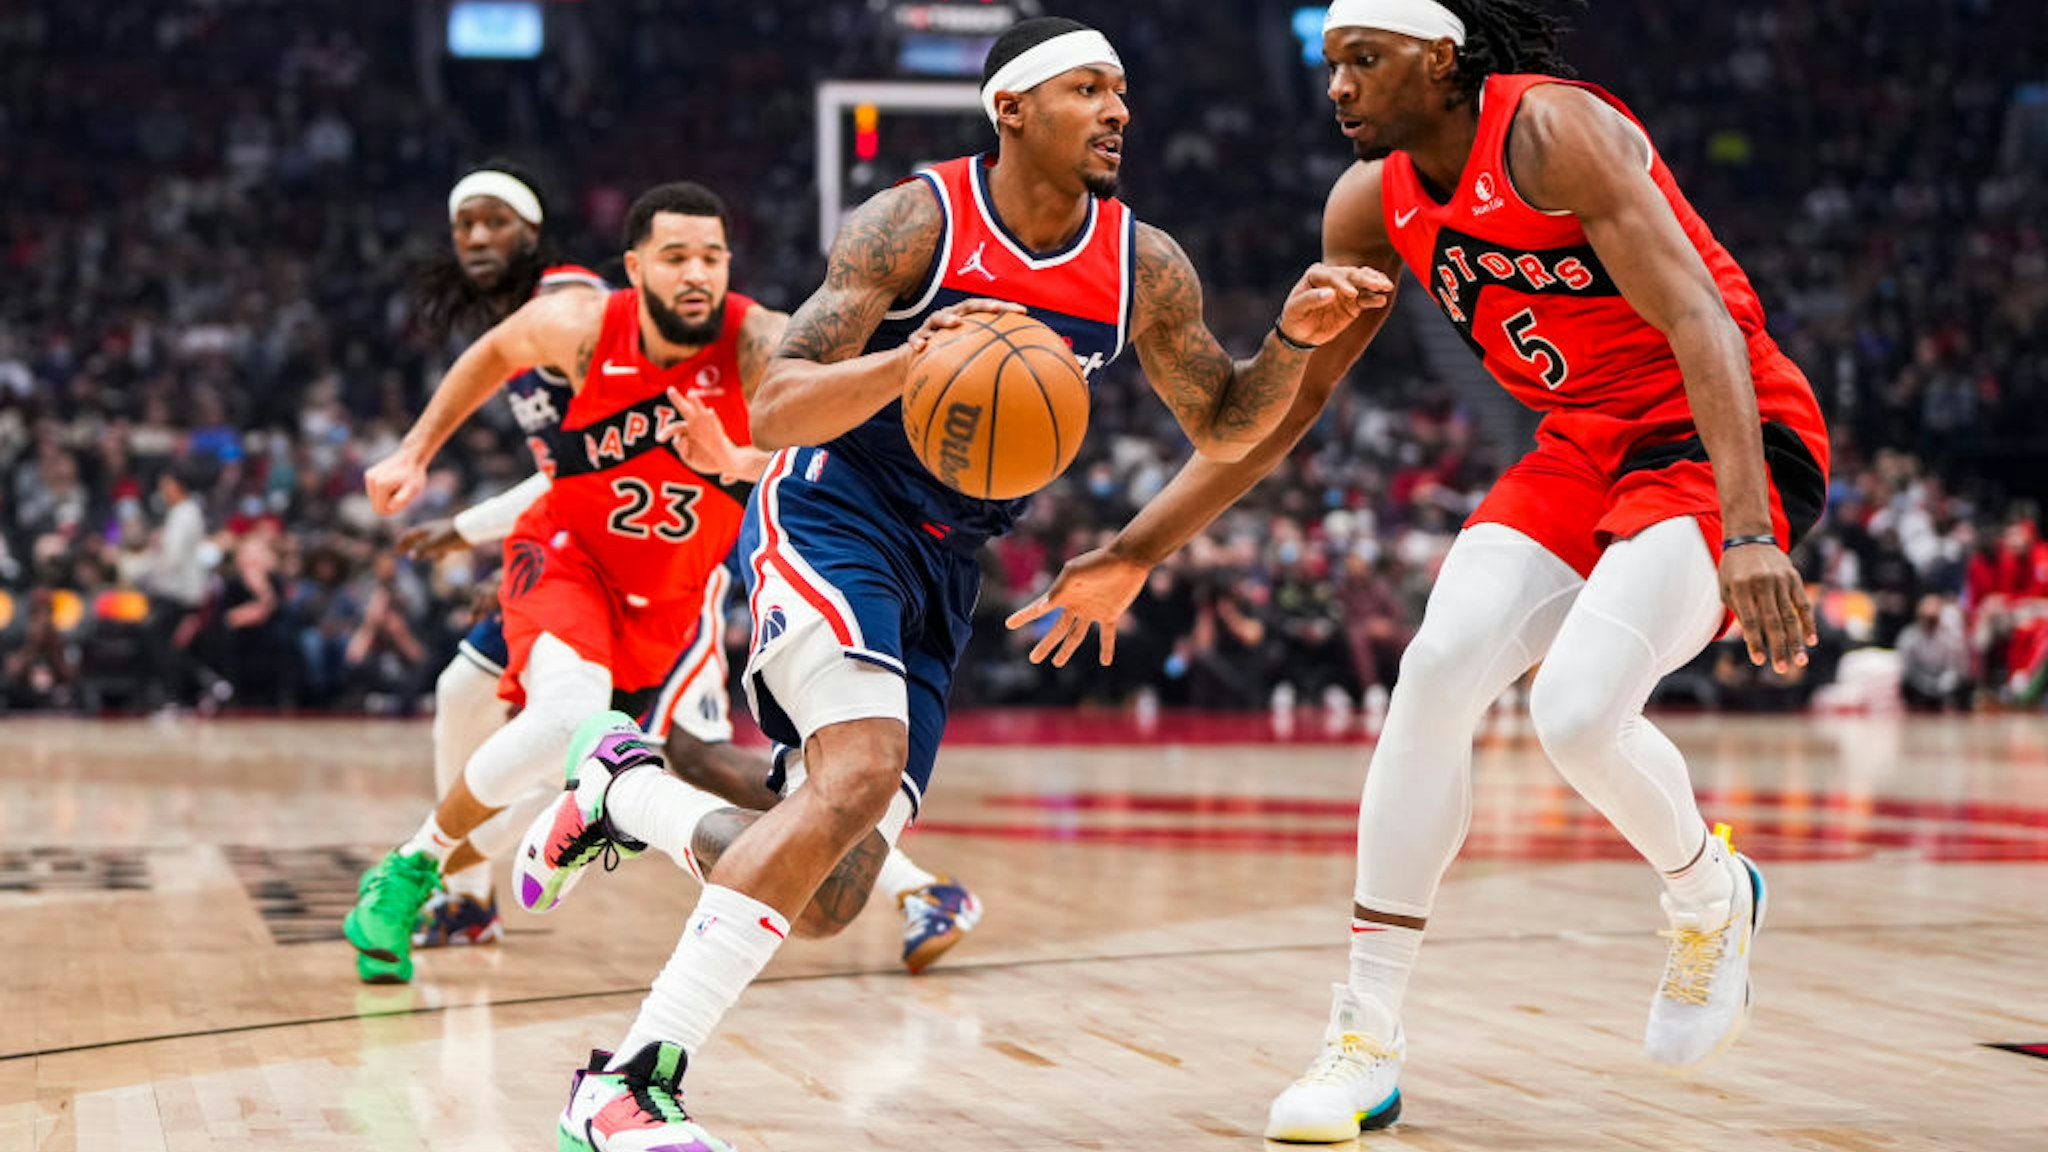 TORONTO, ON - DECEMBER 5: Bradley Beal #3 of the Washington Wizards drives against Precious Achiuwa #5 of the Toronto Raptors during the first half of their basketball game at the Scotiabank Arena on December 5, 2021 in Toronto, Ontario, Canada. NOTE TO USER: User expressly acknowledges and agrees that, by downloading and/or using this Photograph, user is consenting to the terms and conditions of the Getty Images License Agreement. (Photo by Mark Blinch/Getty Images)